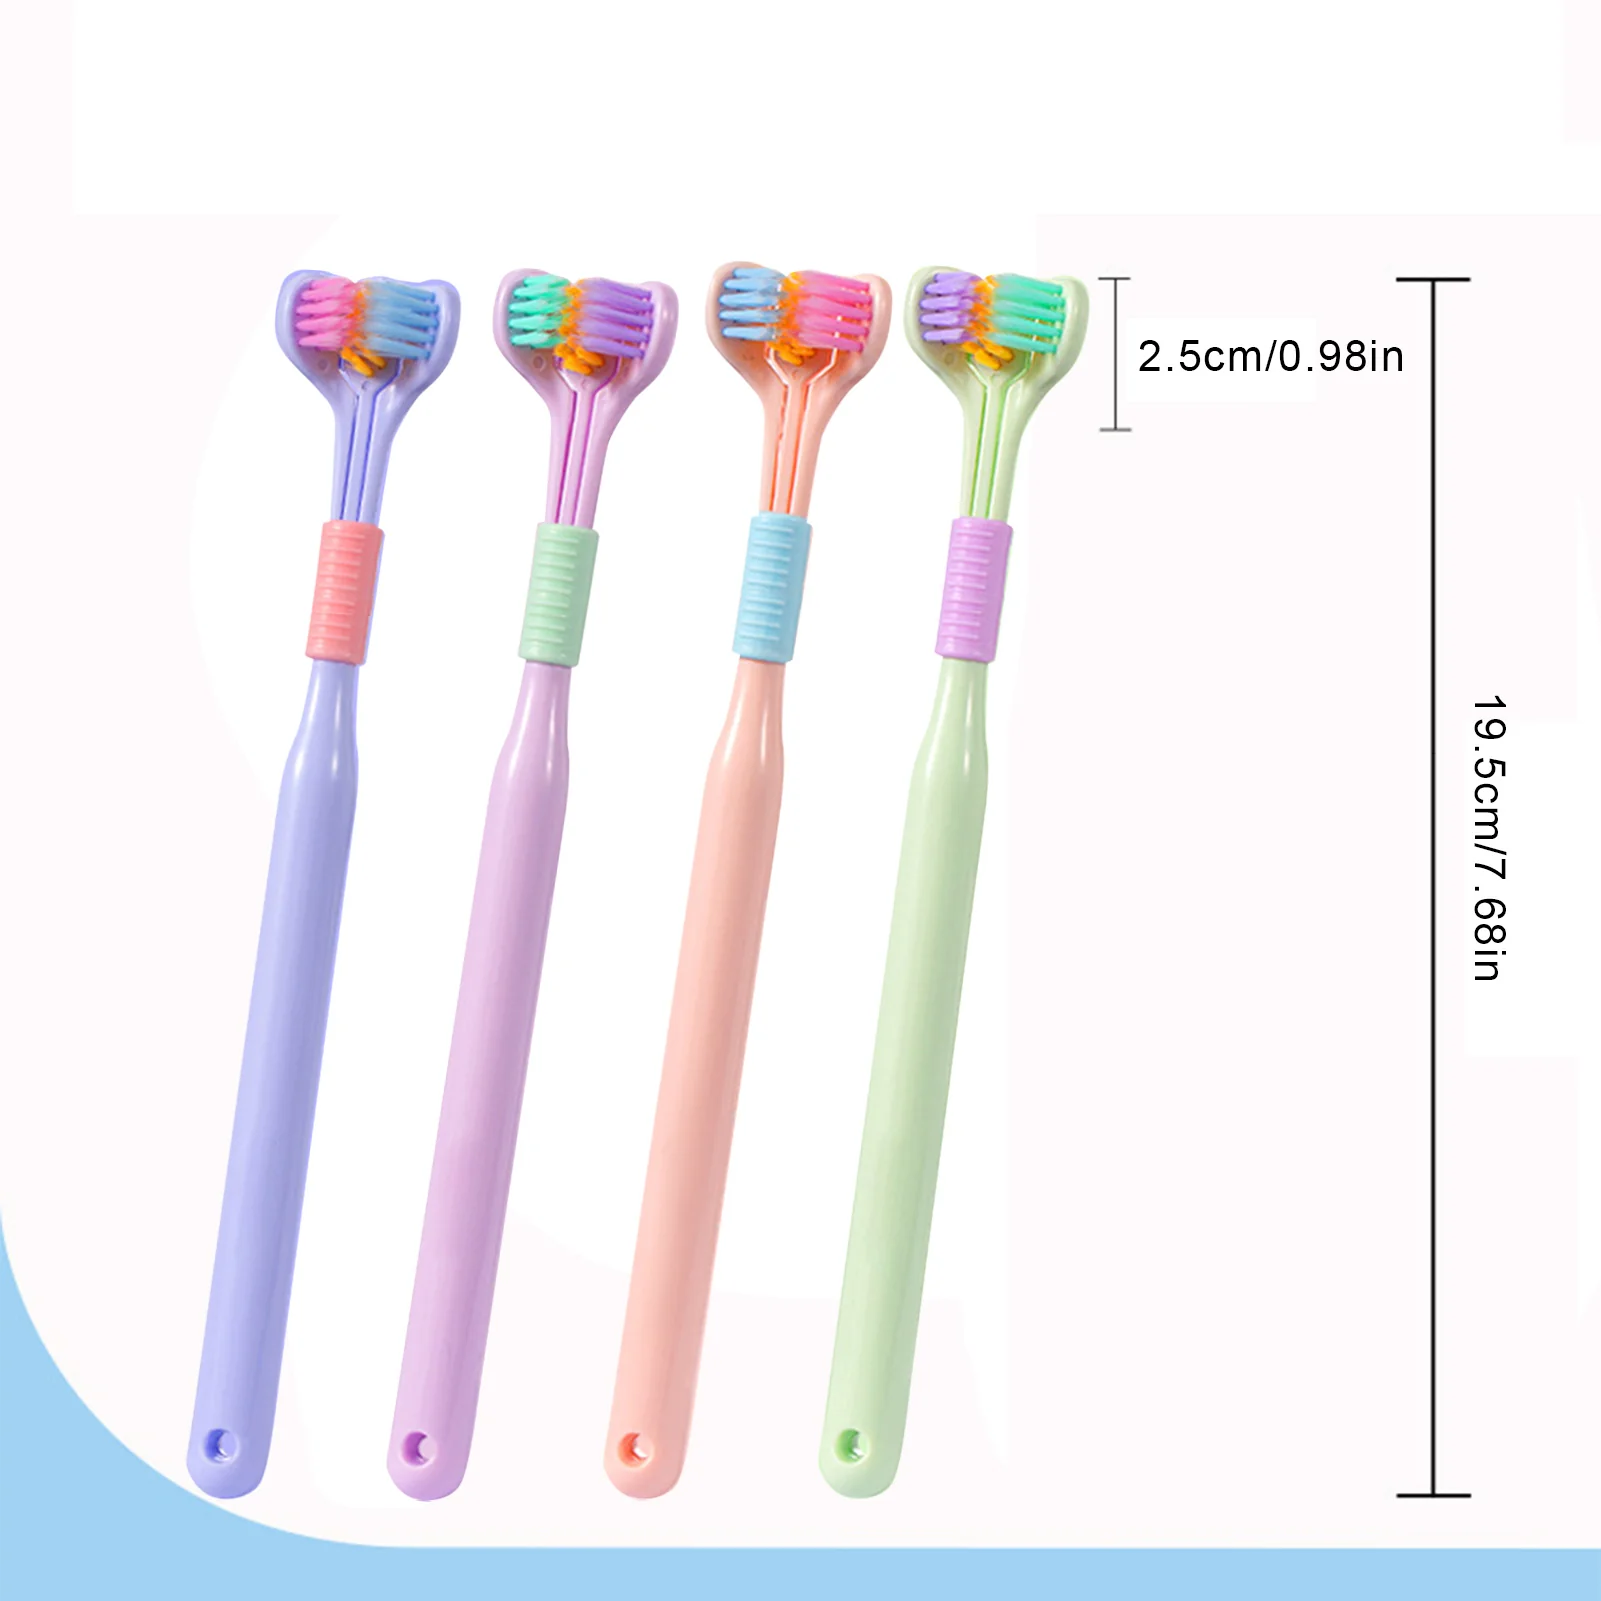 3-Sided Manual Deep Oral Care Portable Toothbrushes image